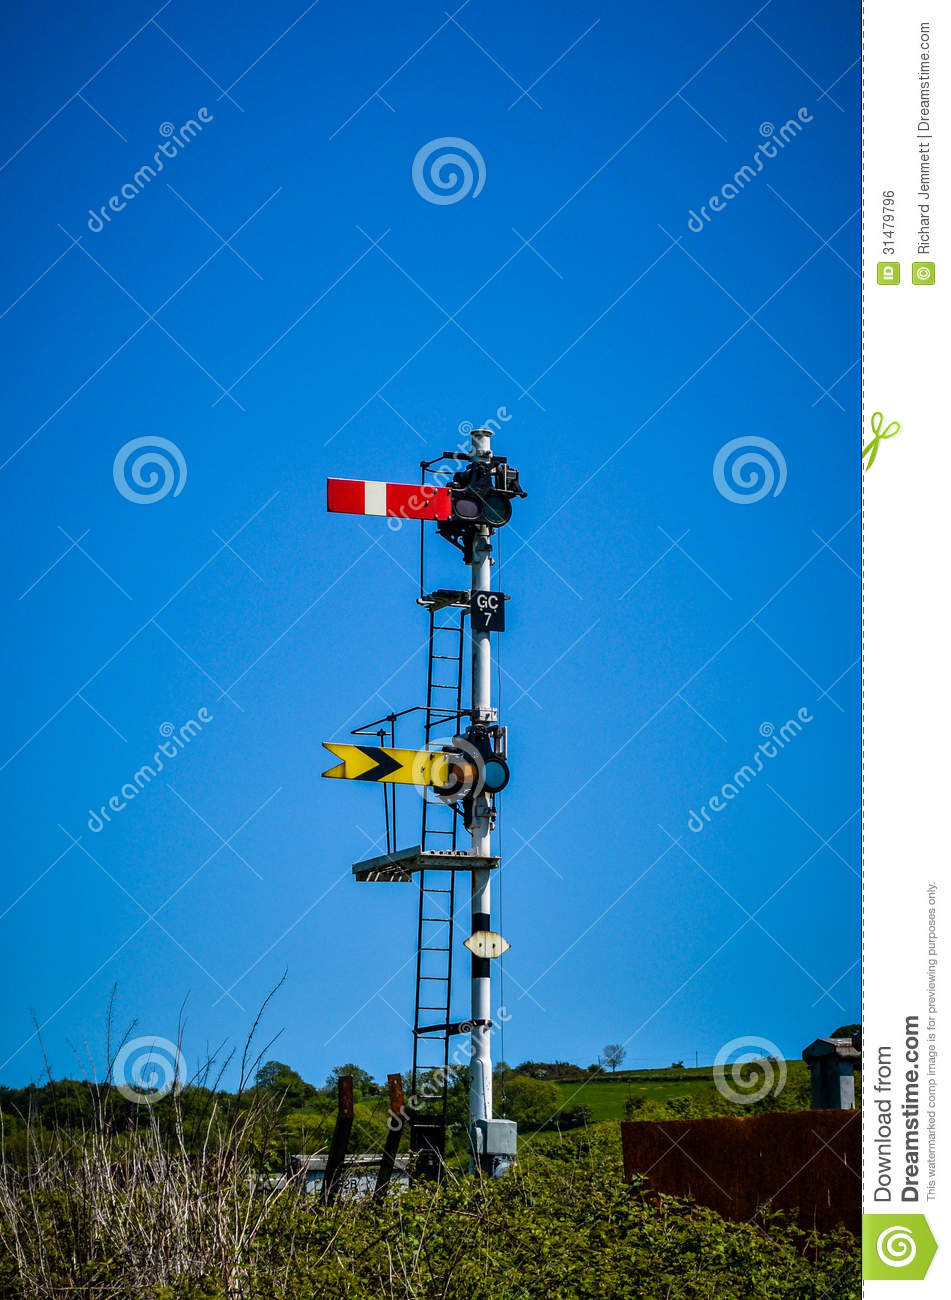 Railroad Signal Against Blue Sky Royalty Free Stock Image   Image